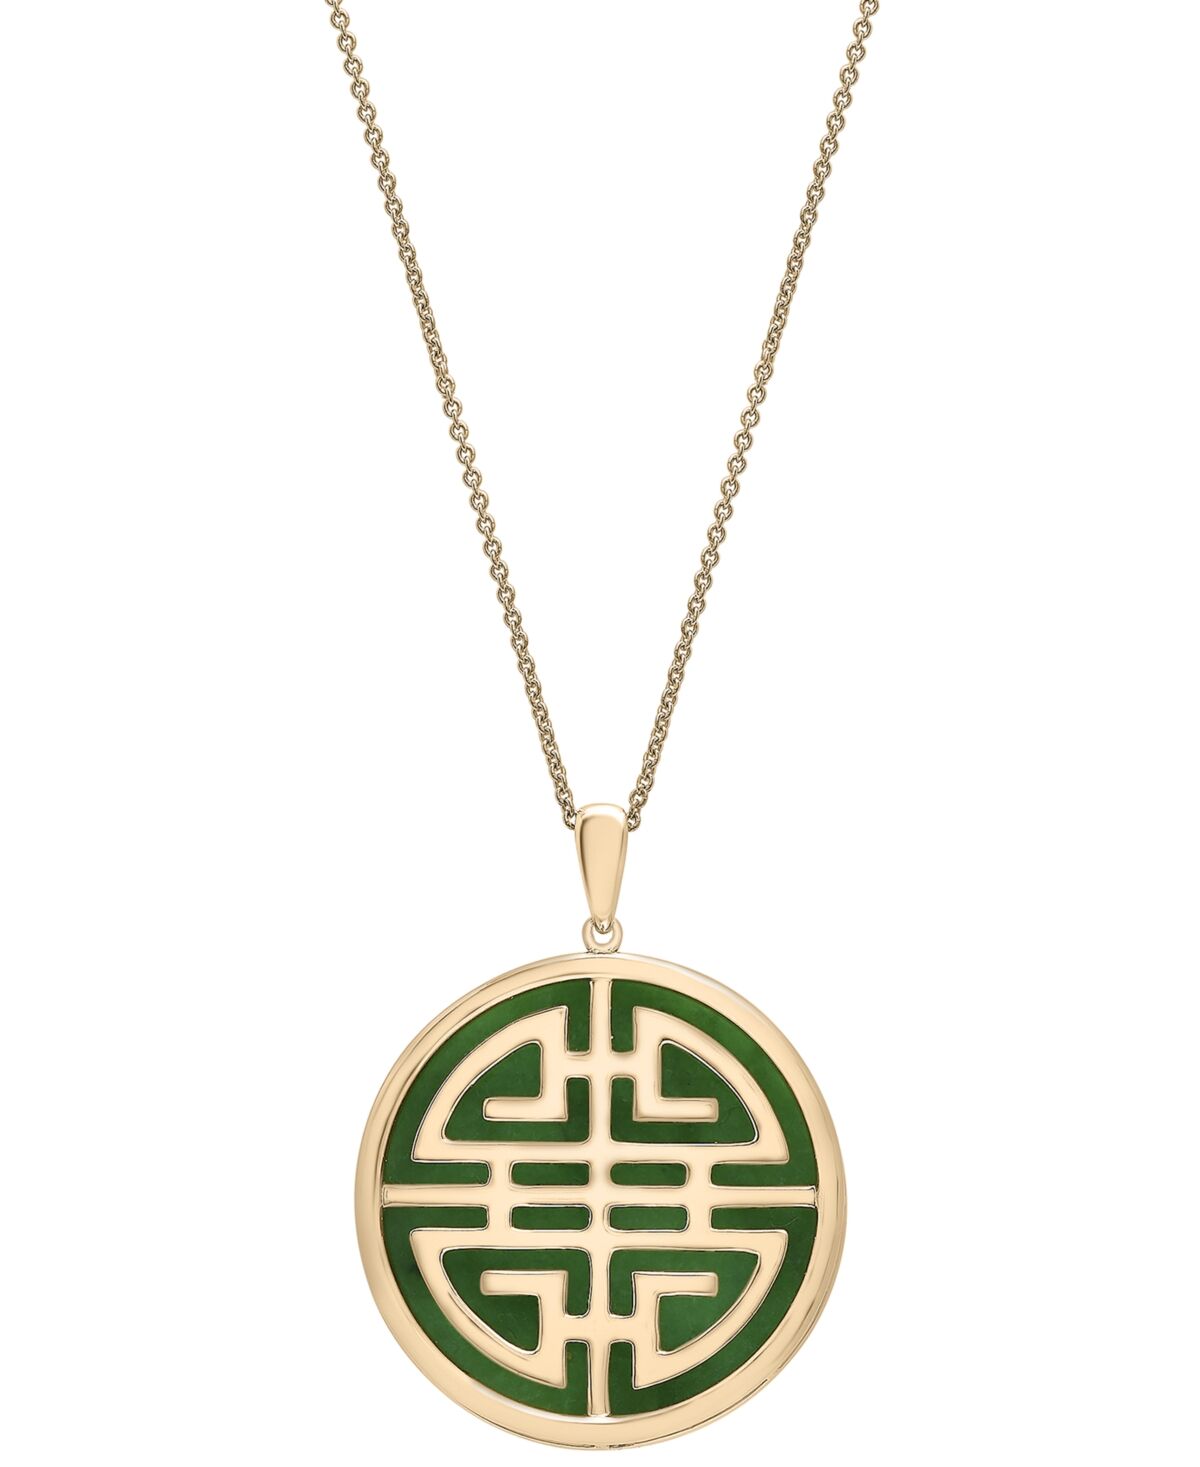 Macy's Jade Double Happiness Inlay Pendant Neckalce in 14k Gold-Plated Sterling Silver, 18